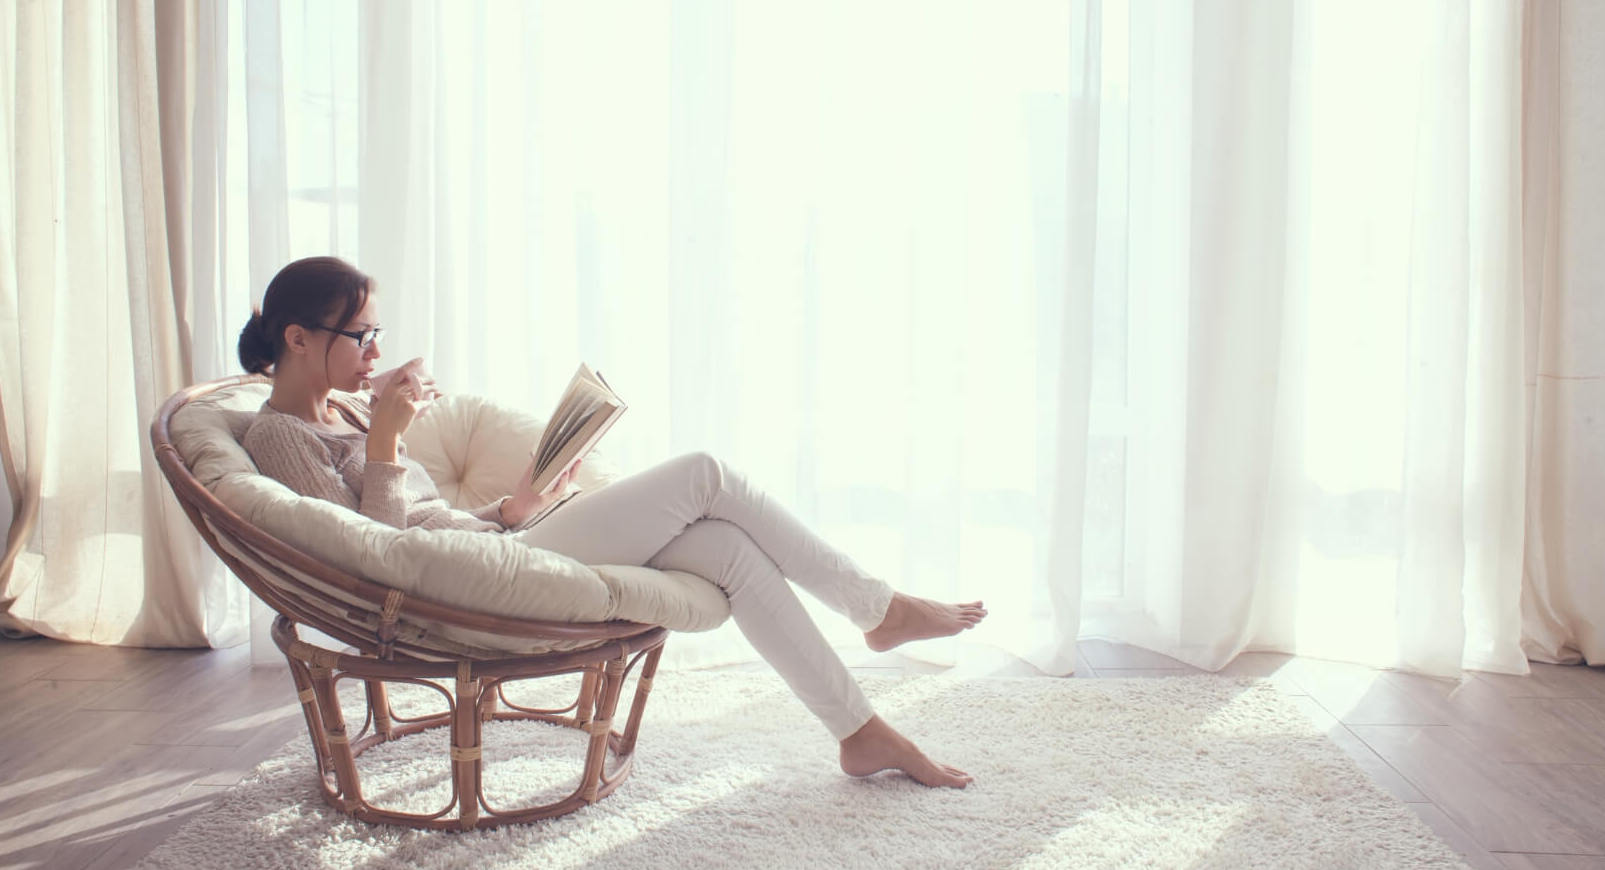 A woman sitting in a chair reading a book on emotional resilience and mindfulness practices.